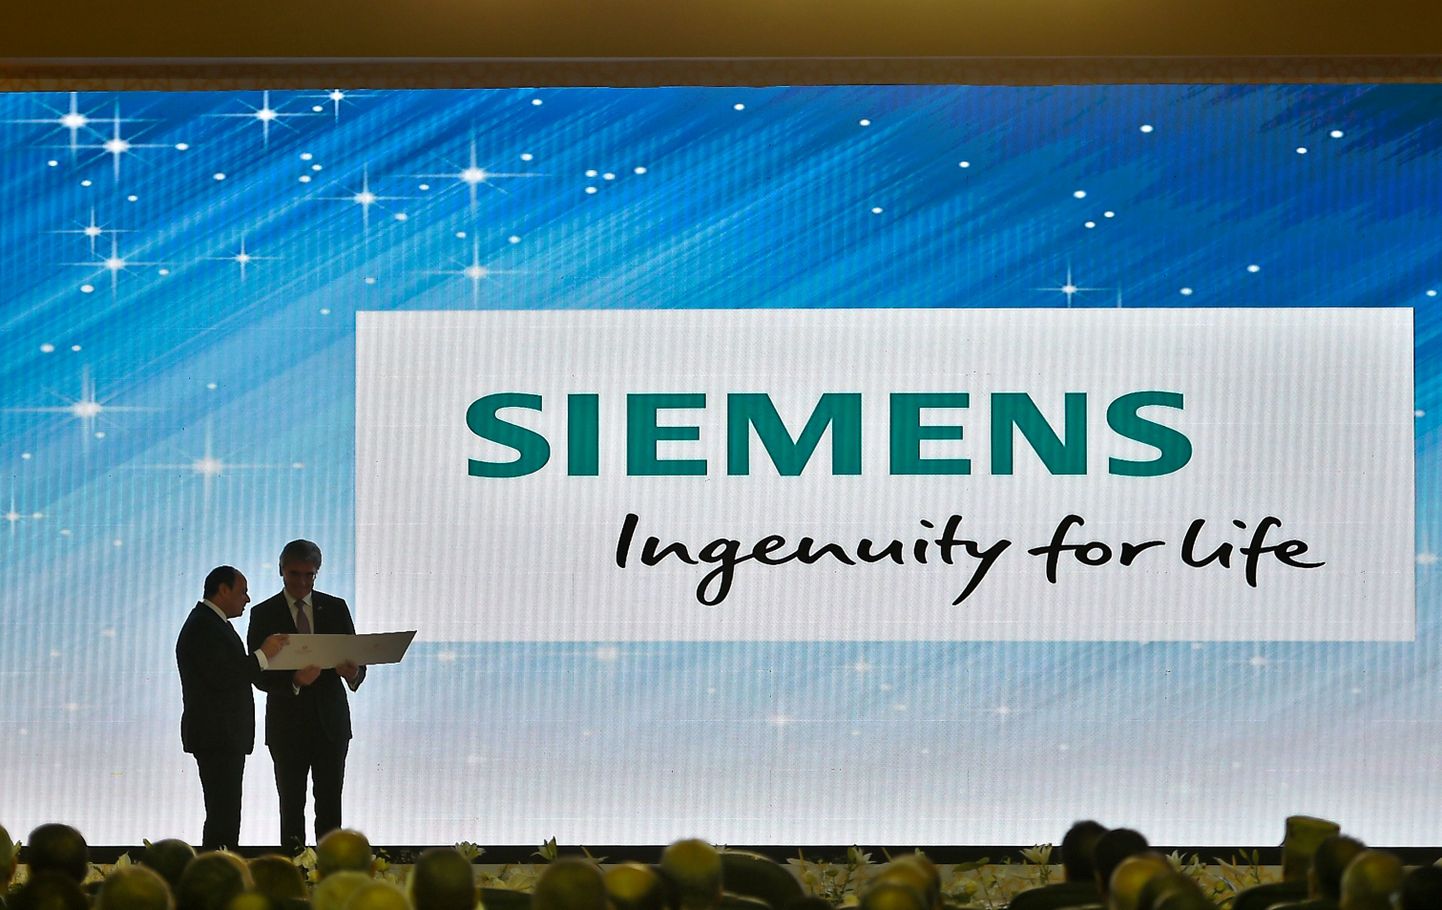 Egyptian President Abdel Fattah al-Sisi (L) and Joe Kaeser (R) the CEO of German engineering giant Siemens look at a document during the inauguration of three large power plants as well as other projects in the energy sector, on the outskirts of the capital Cairo on July 24, 2018. 
The Egyptian President inaugurated energy projects across the country as Egypt gains an electricity production surplus, after years of power cuts that peaked in 2014. The stations, built by Siemens company, include "the largest air-cooled station in the world" in the new capital, said Electricity Minister Mohammed Shaker. / AFP PHOTO / KHALED DESOUKI